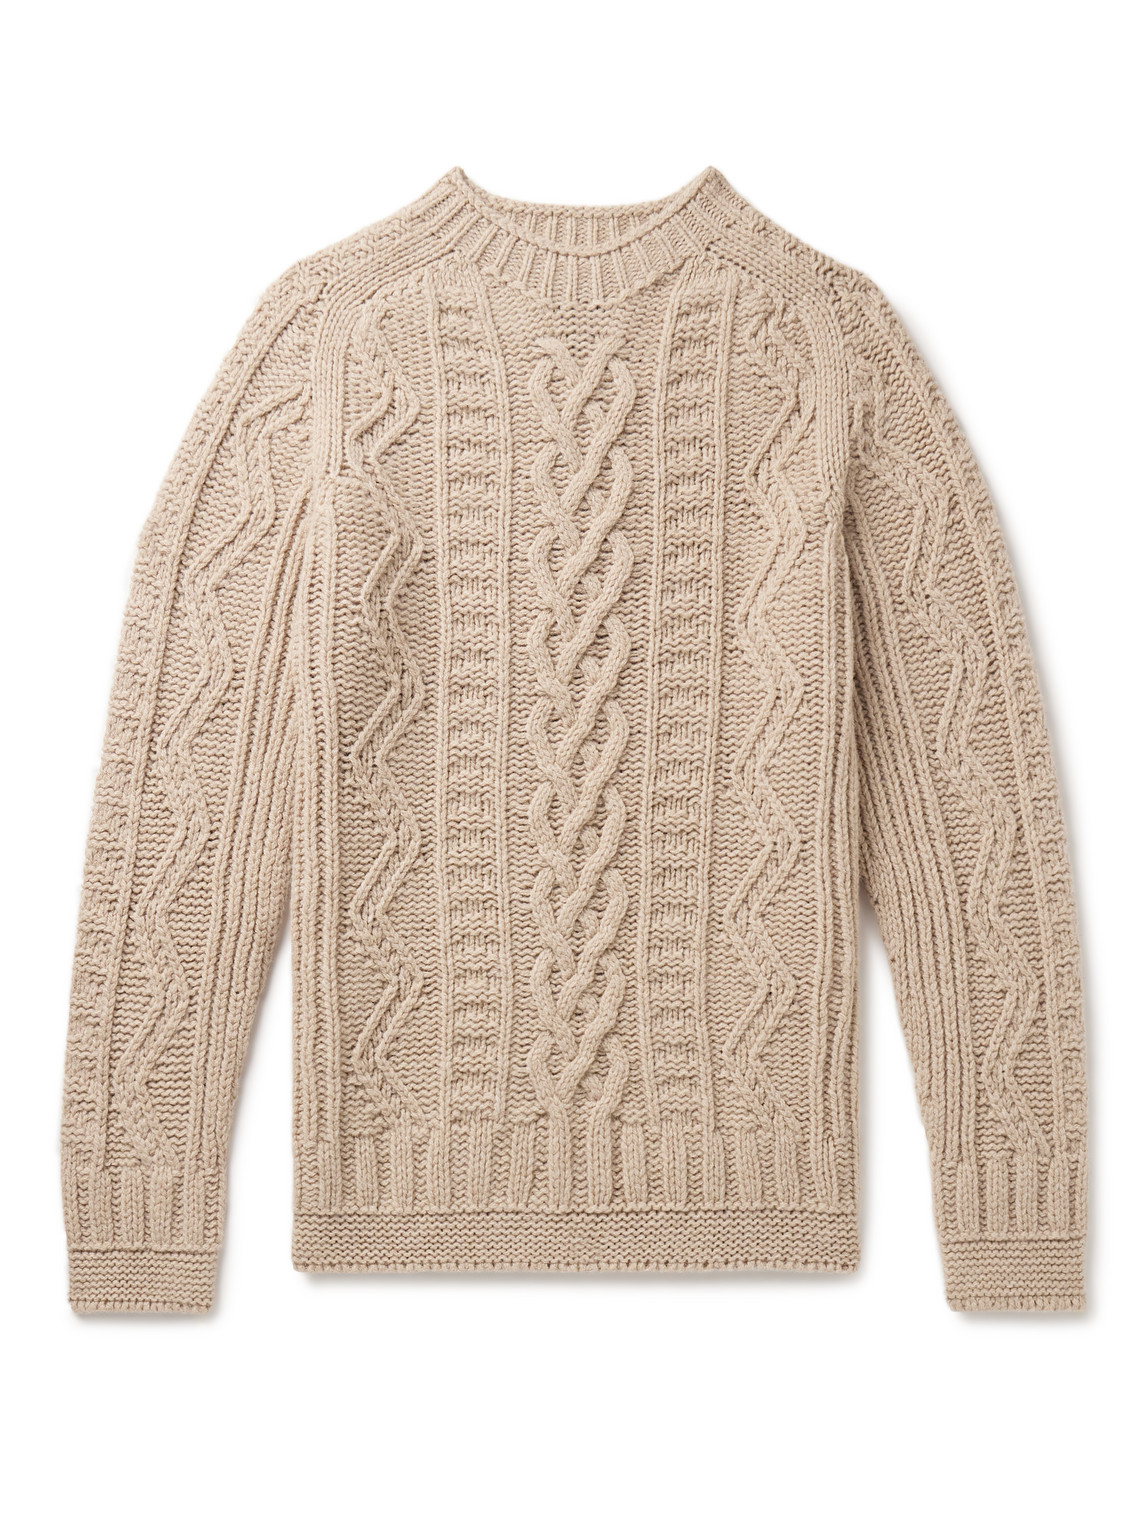 HOWLIN' SUPER CULT SLIM-FIT CABLE-KNIT VIRGIN WOOL SWEATER